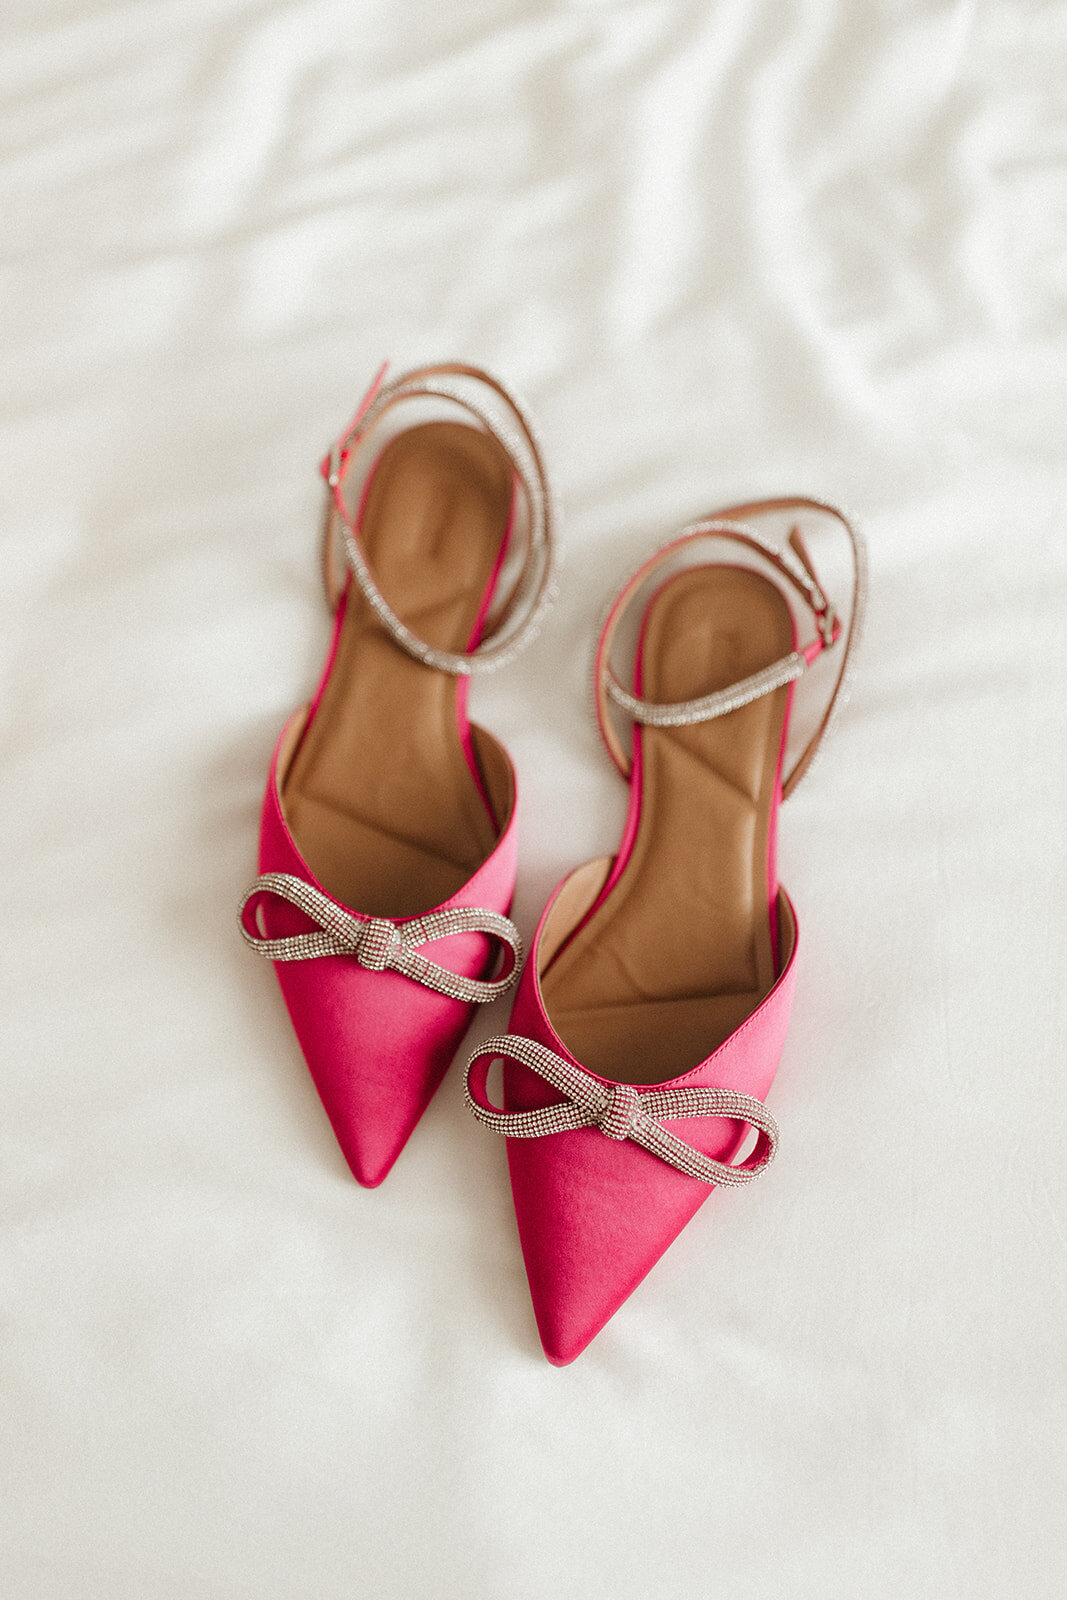 Photo of hot pink heels on white background